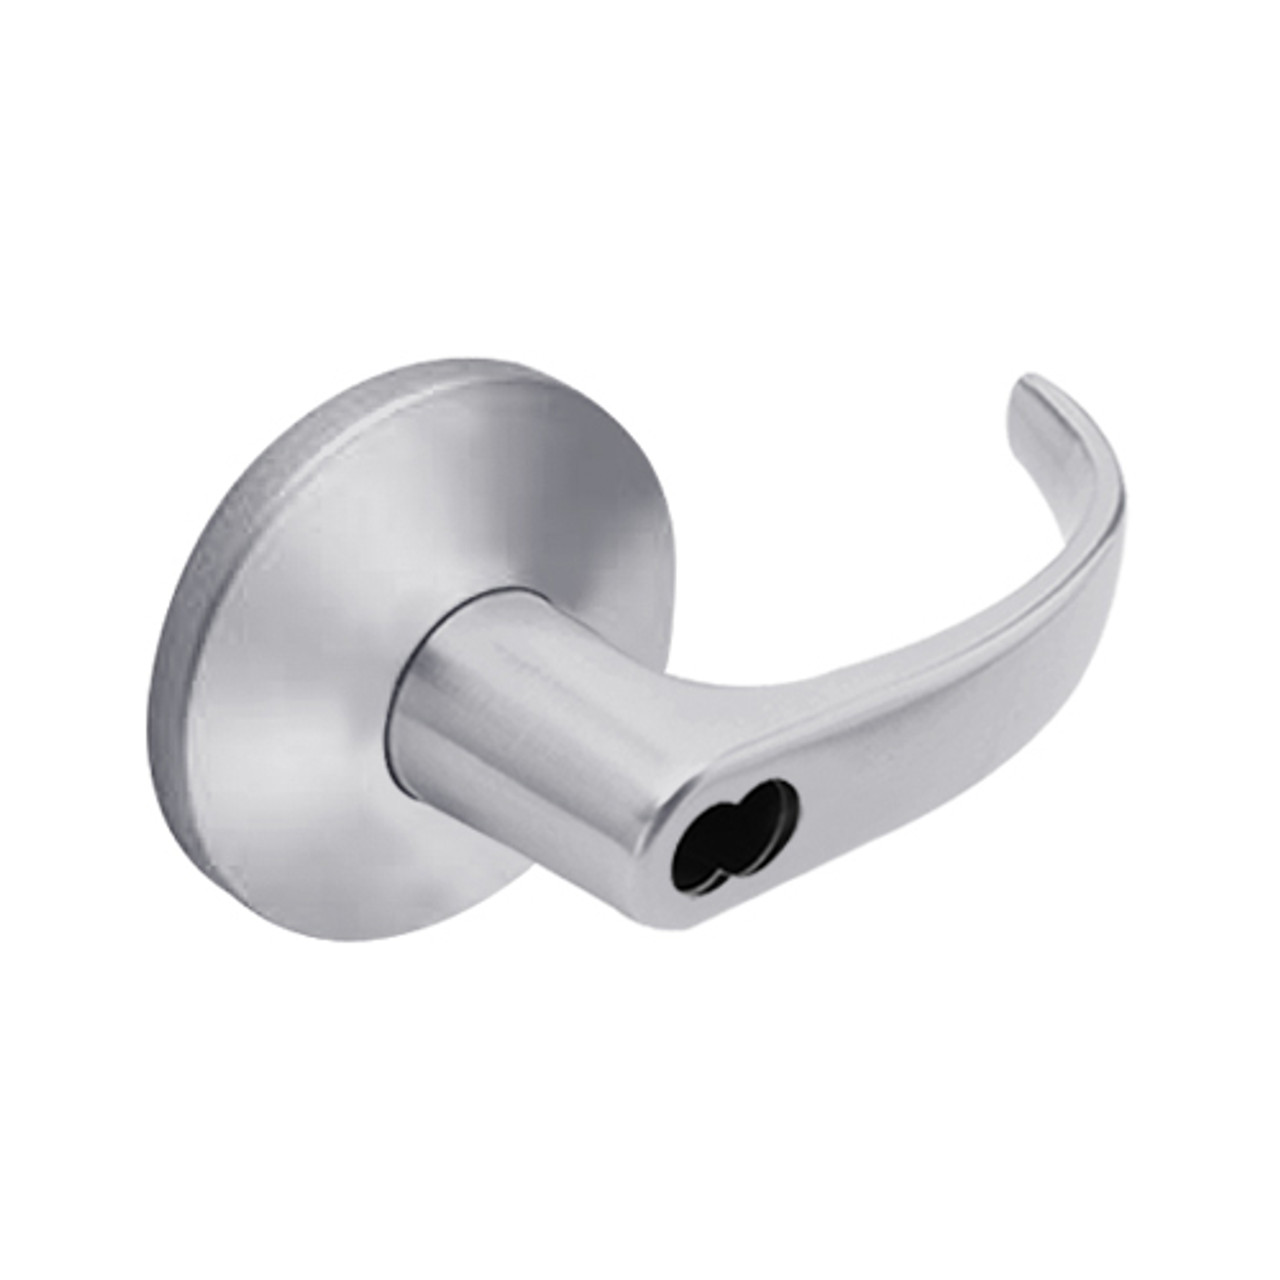 9K37YR14LS3626 Best 9K Series Special Function Cylindrical Lever Locks with Curved with Return Lever Design Accept 7 Pin Best Core in Satin Chrome